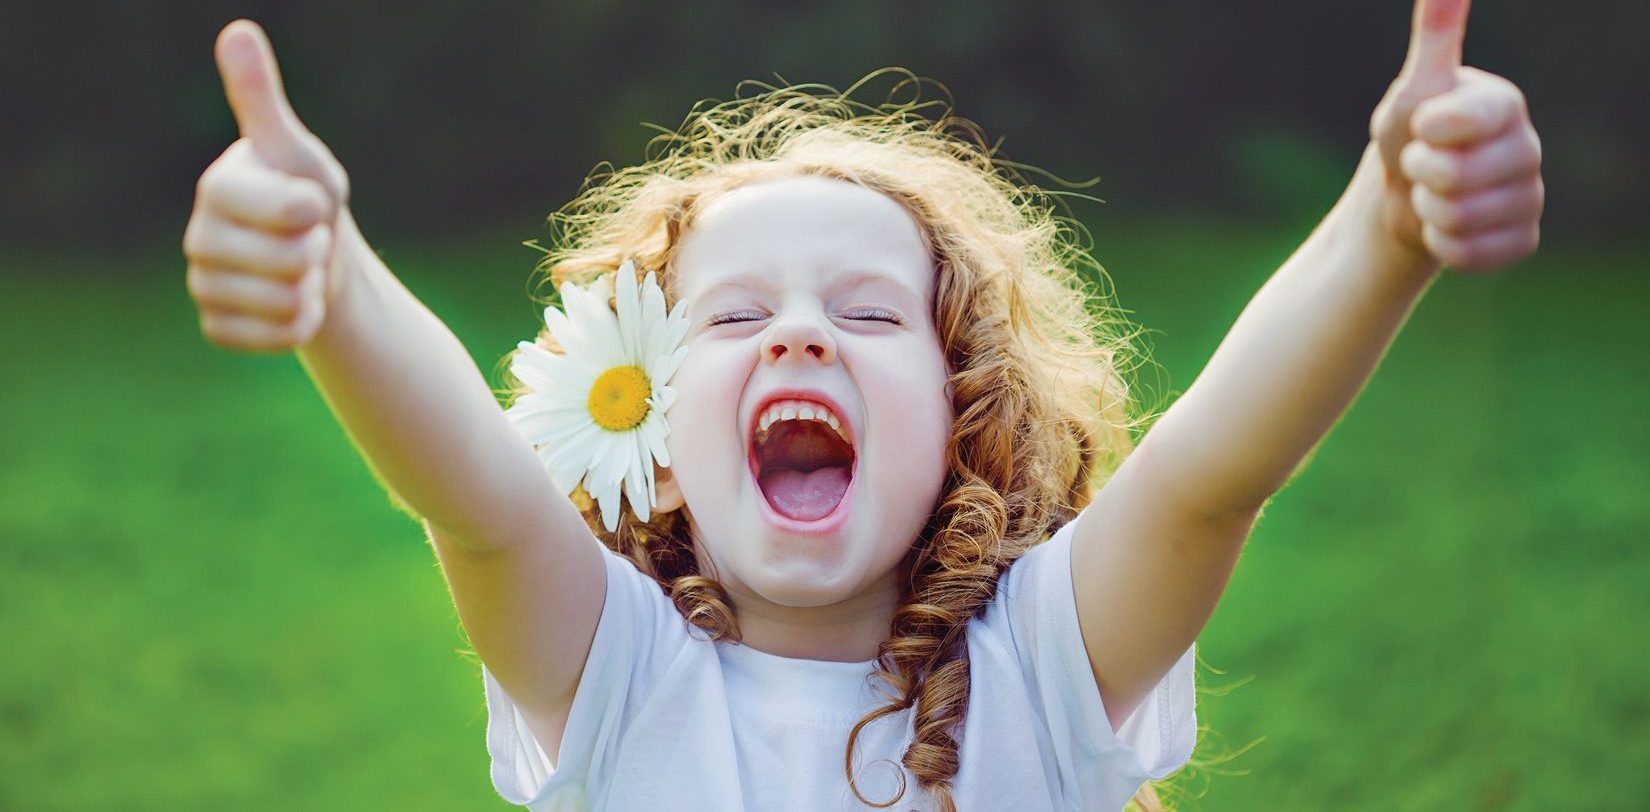 little girl smiling at camera with thumbs up and a large daisy tucked behind her ear